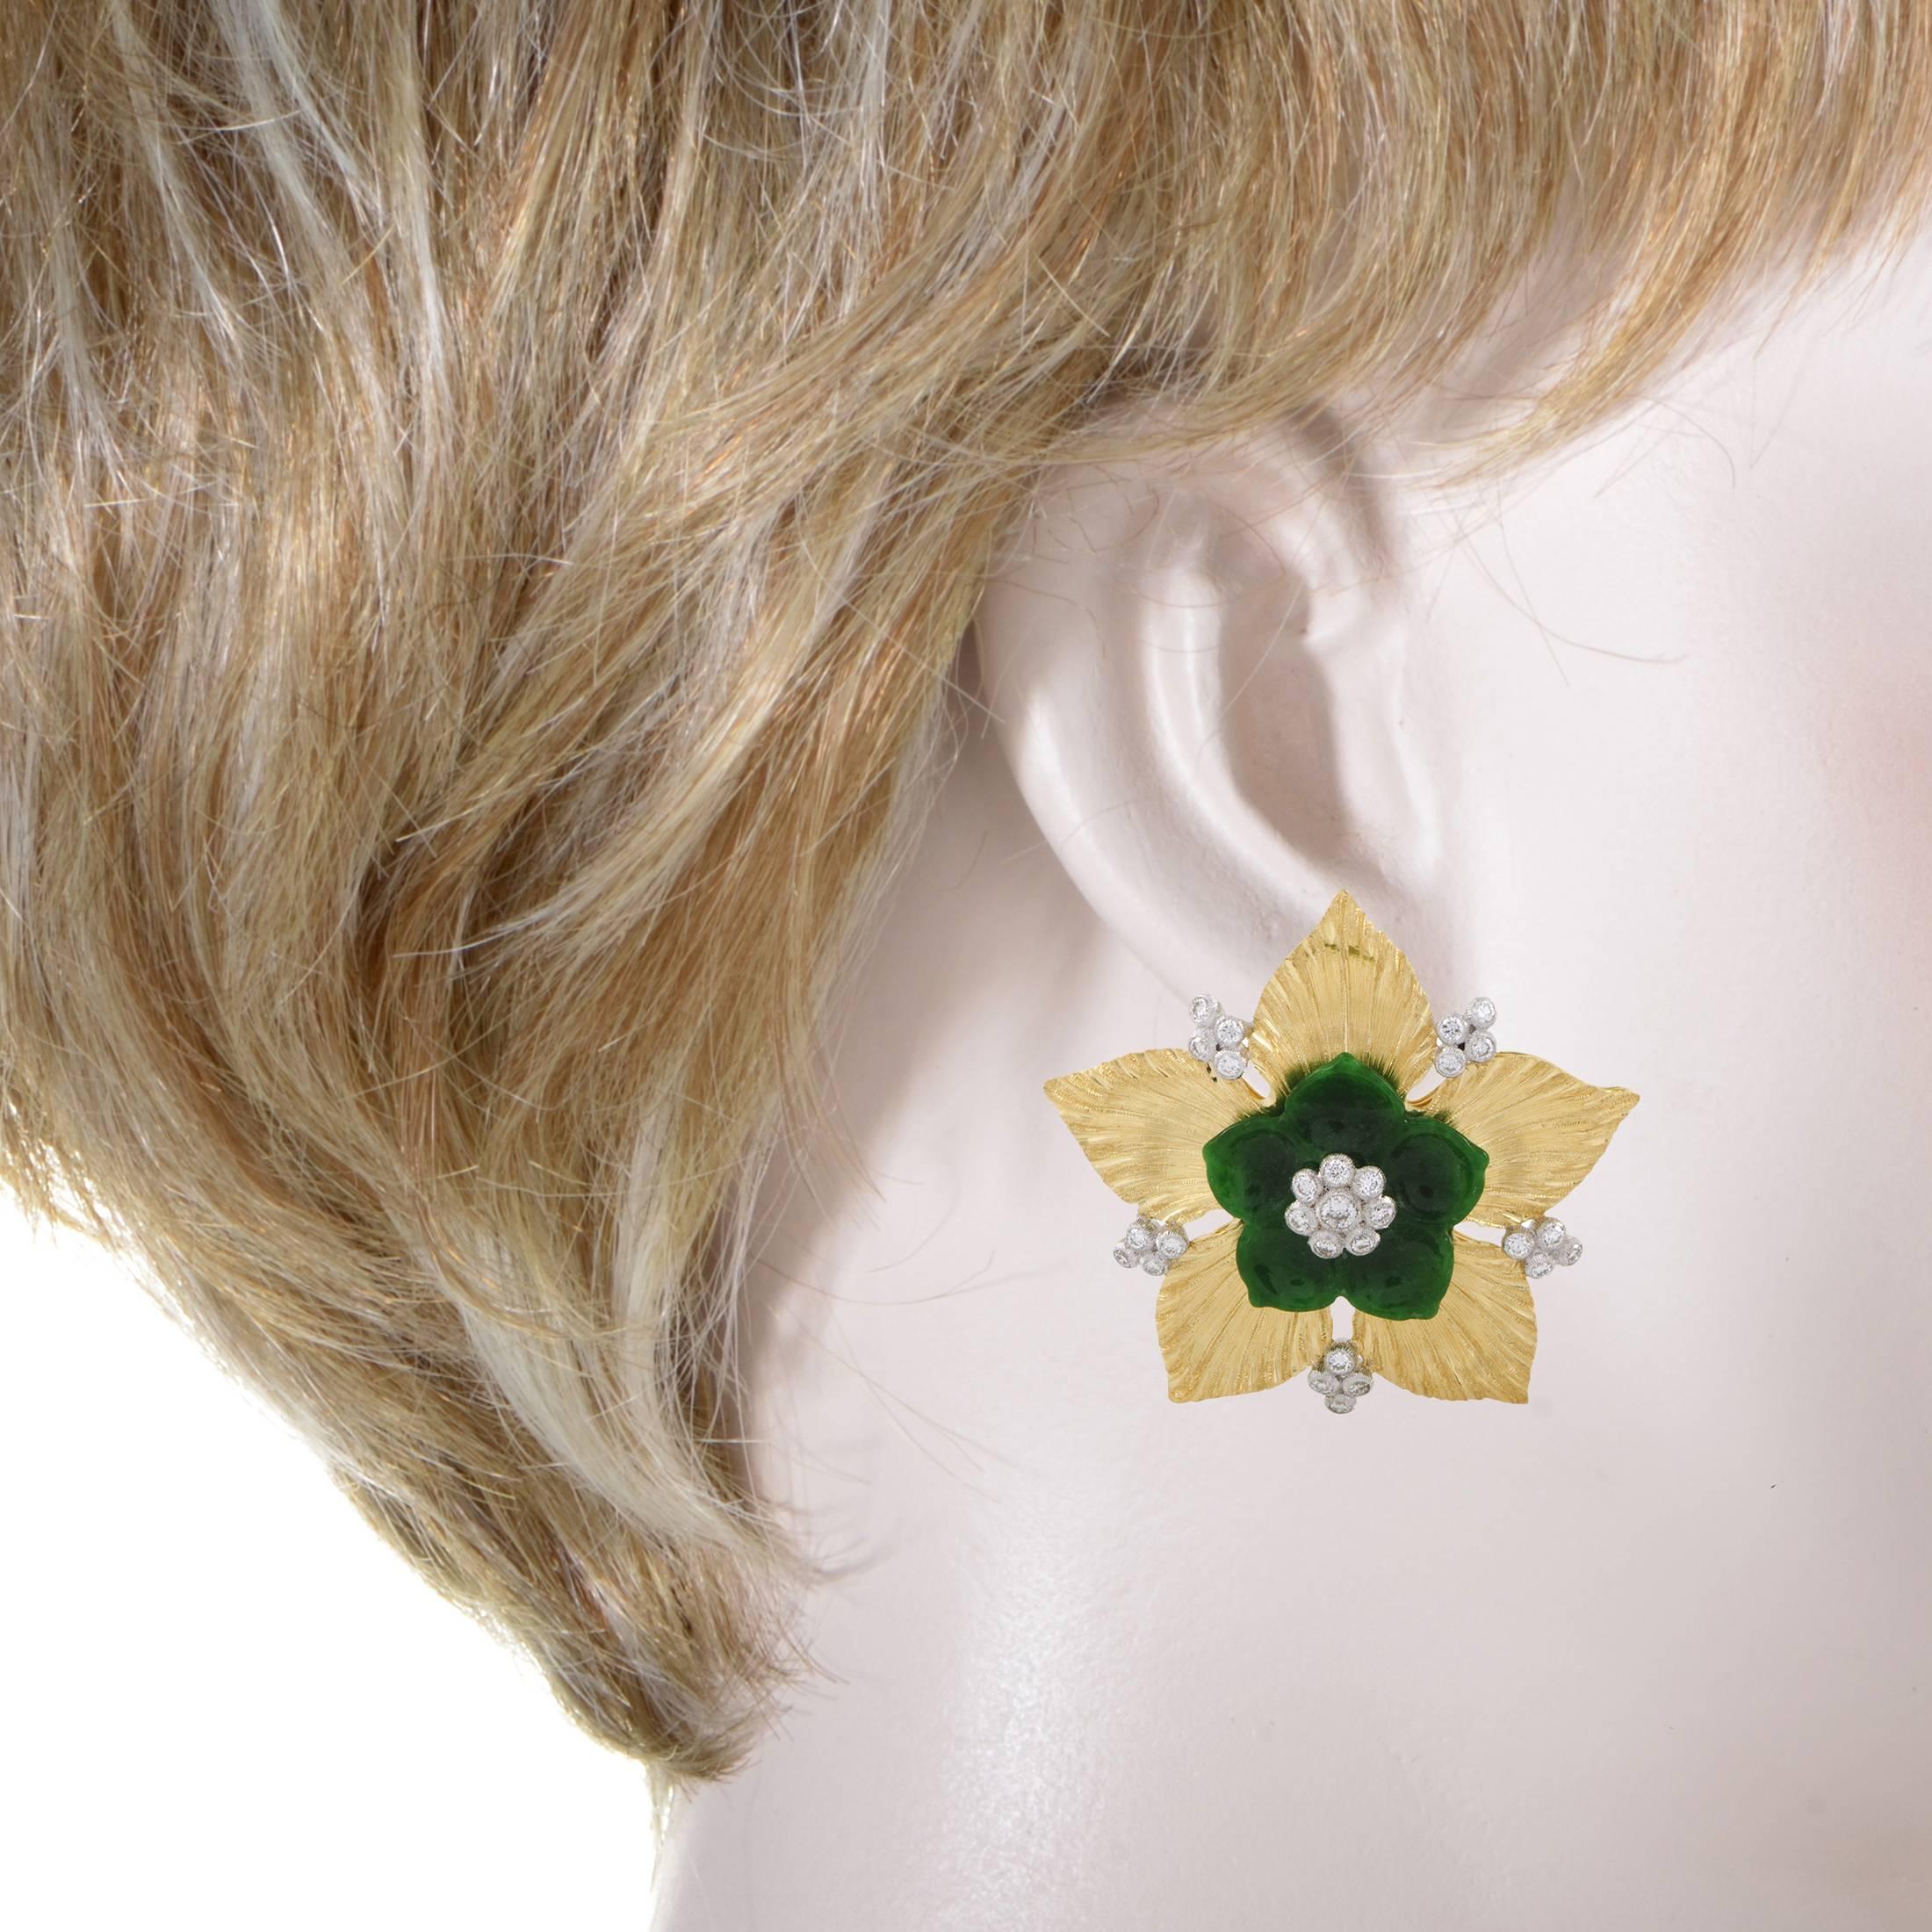 Placed upon radiant 18K yellow and white gold and complemented by glistening diamonds weighing in total 1.20 carats, the fascinating nuance and magnificent beauty of green jade produces an exceptional allure in these nifty earrings from